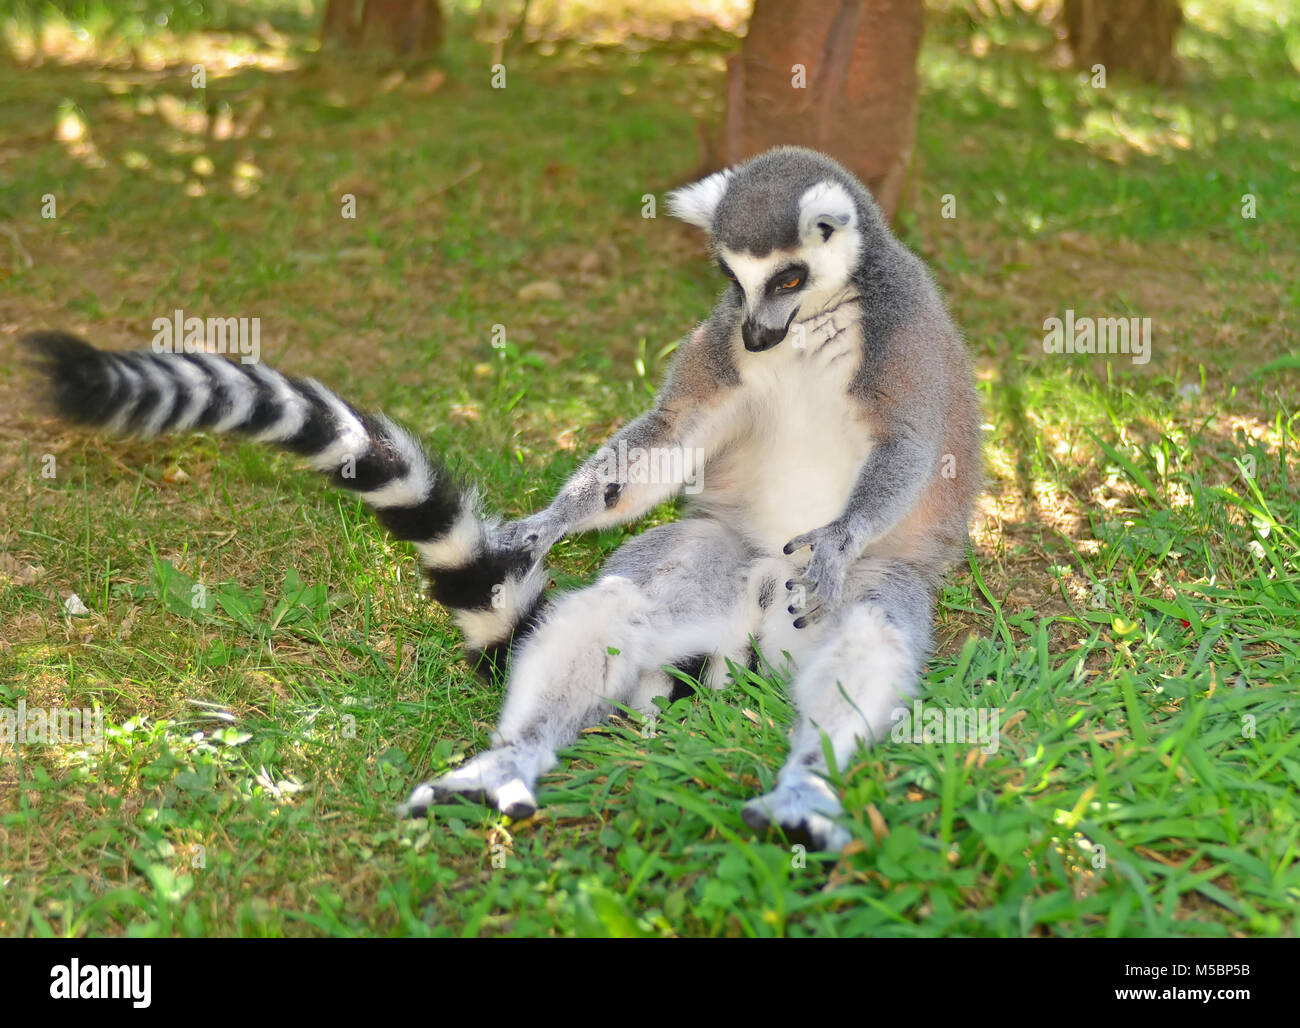 A ring-tailed Lemur plays with its tail while seated upright Stock Photo